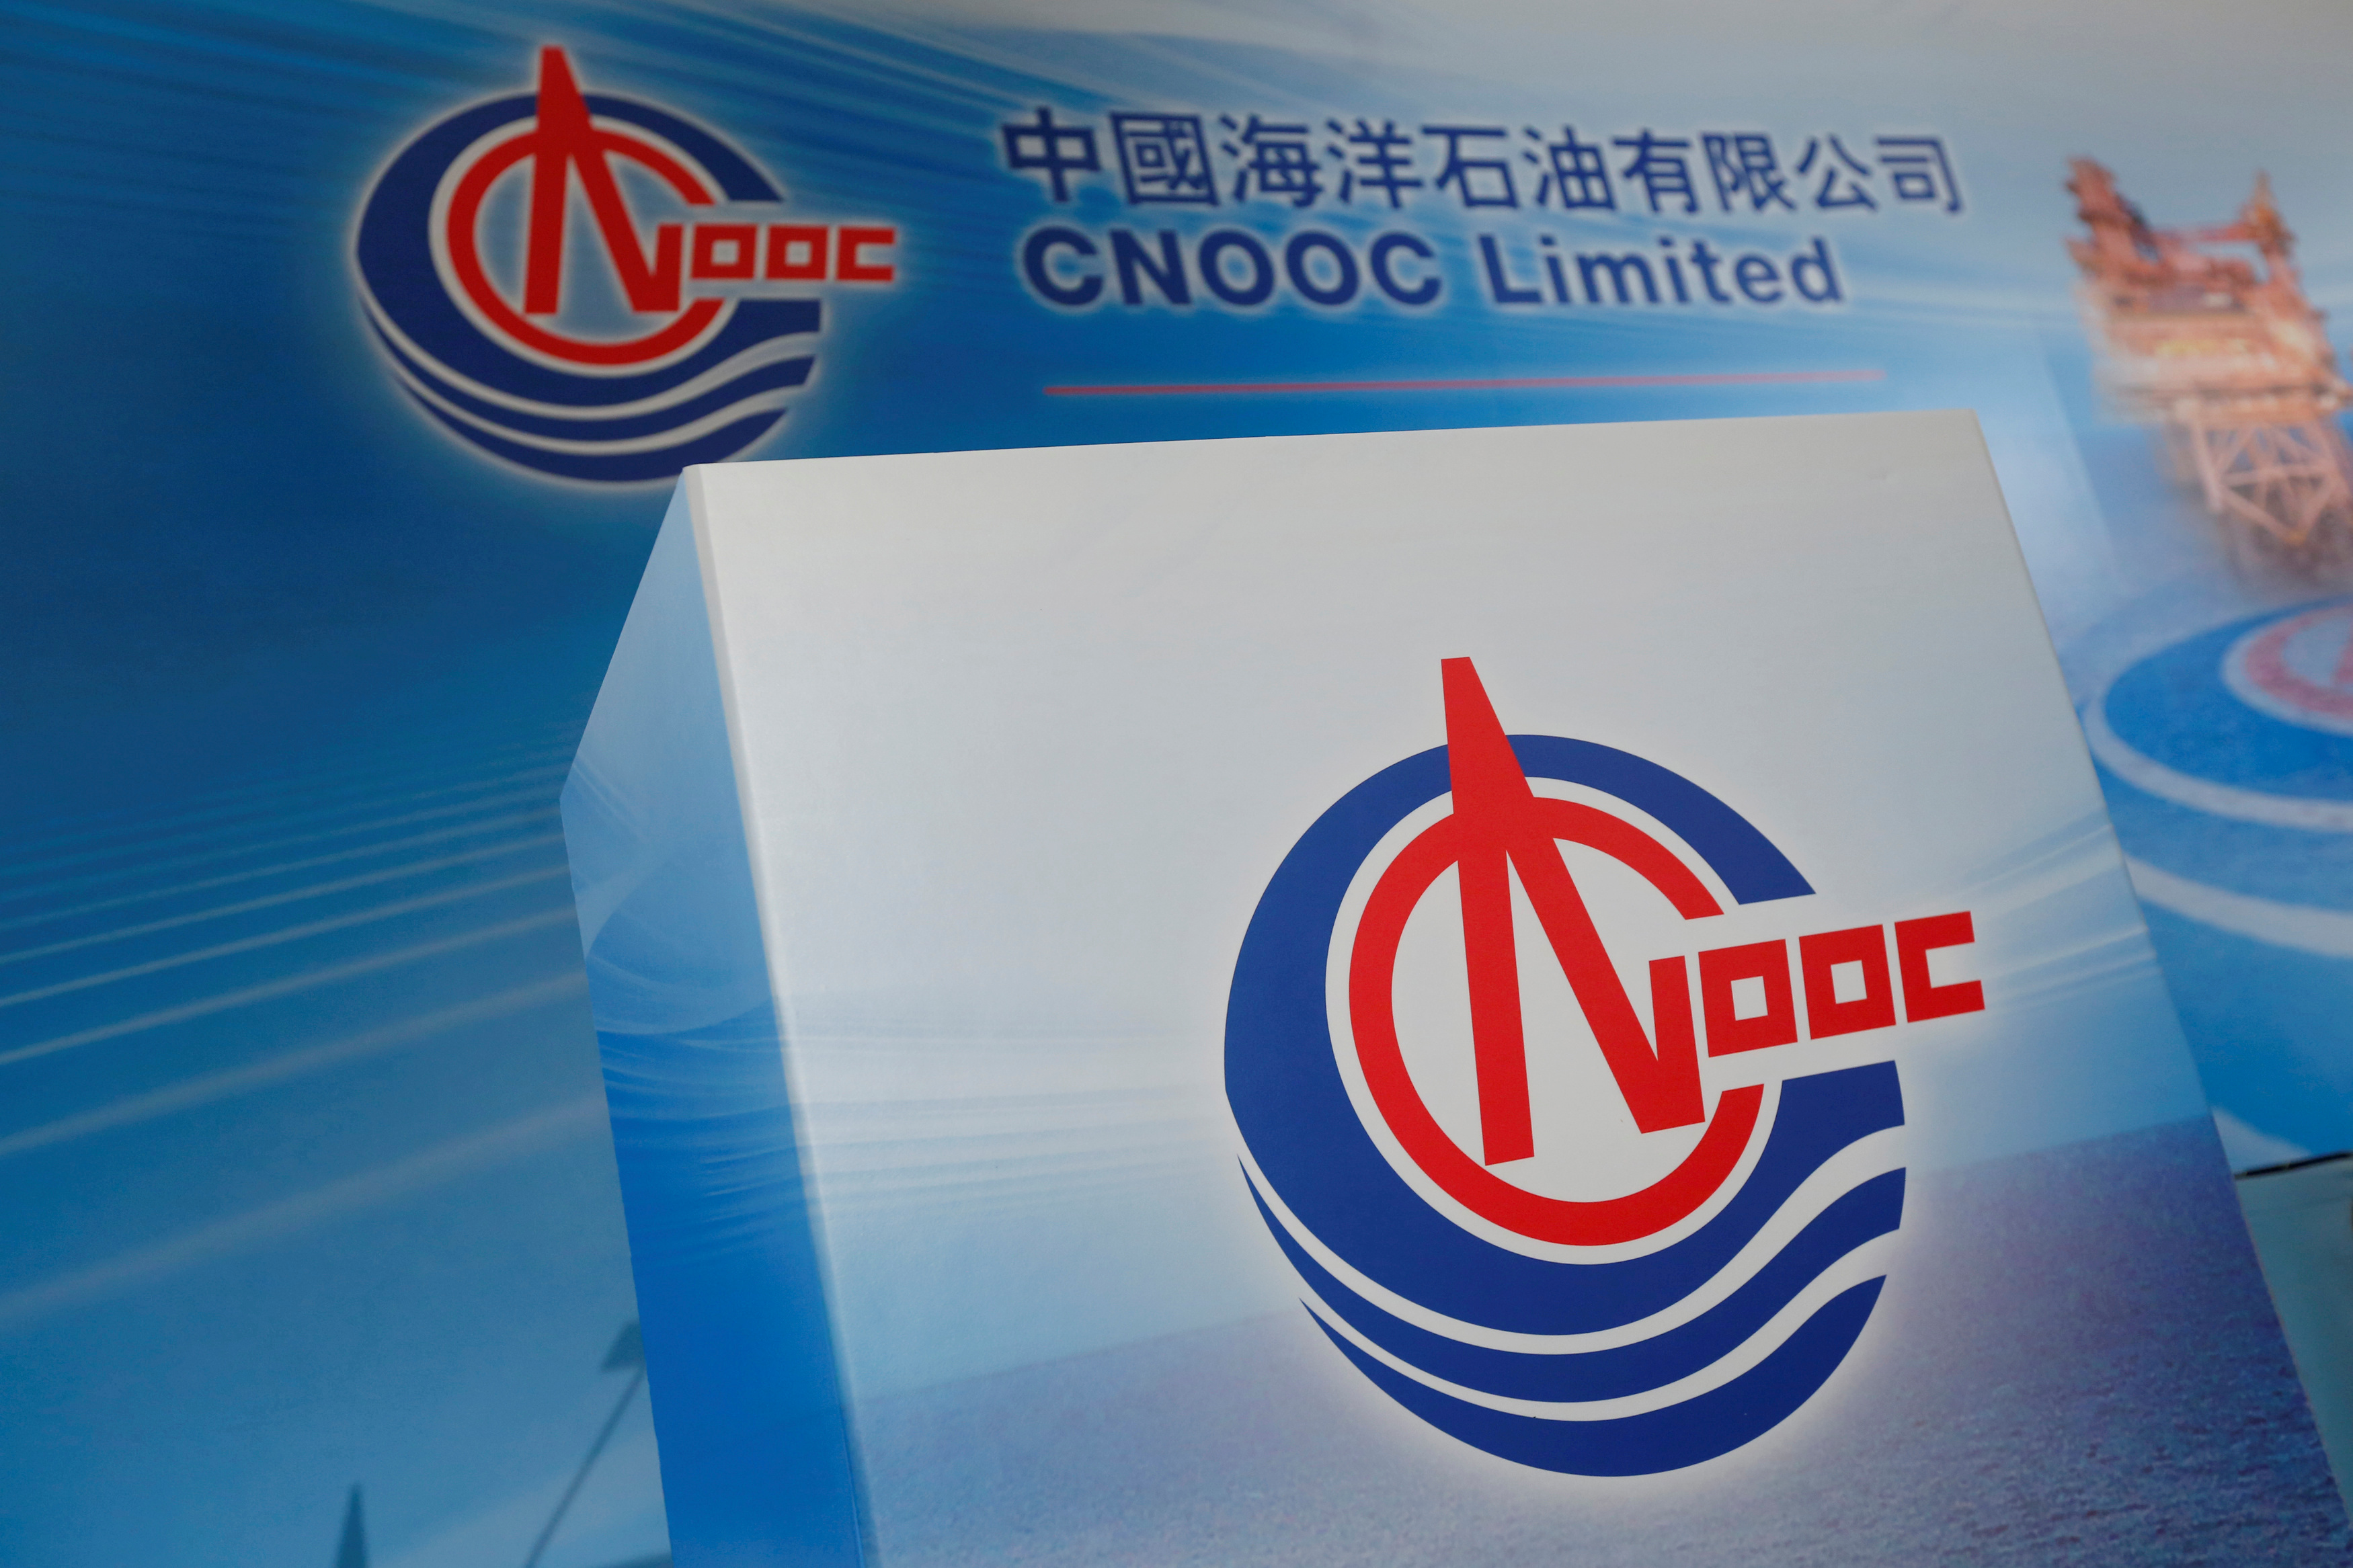 Logos of China National Offshore Oil Corporation (CNOOC) are displayed at a news conference on the company's interim results in Hong Kong, China, March 23, 2017. REUTERS/Bobby Yip